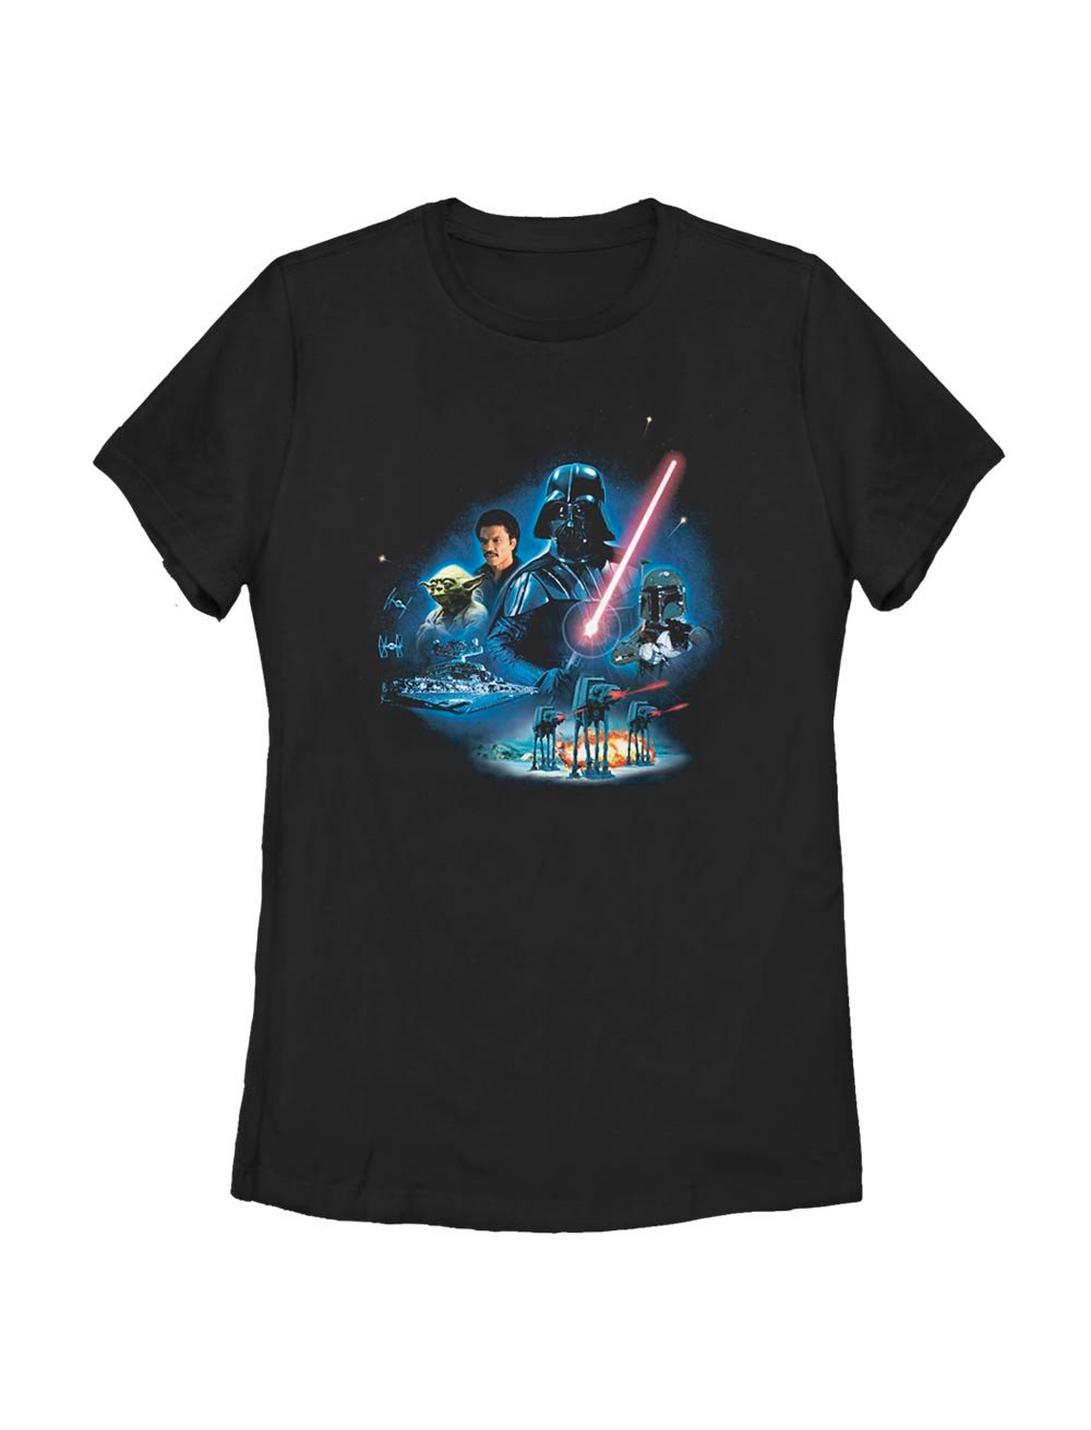 Star Wars Episode V The Empire Strikes Back Characters Womens T-Shirt, BLACK, hi-res